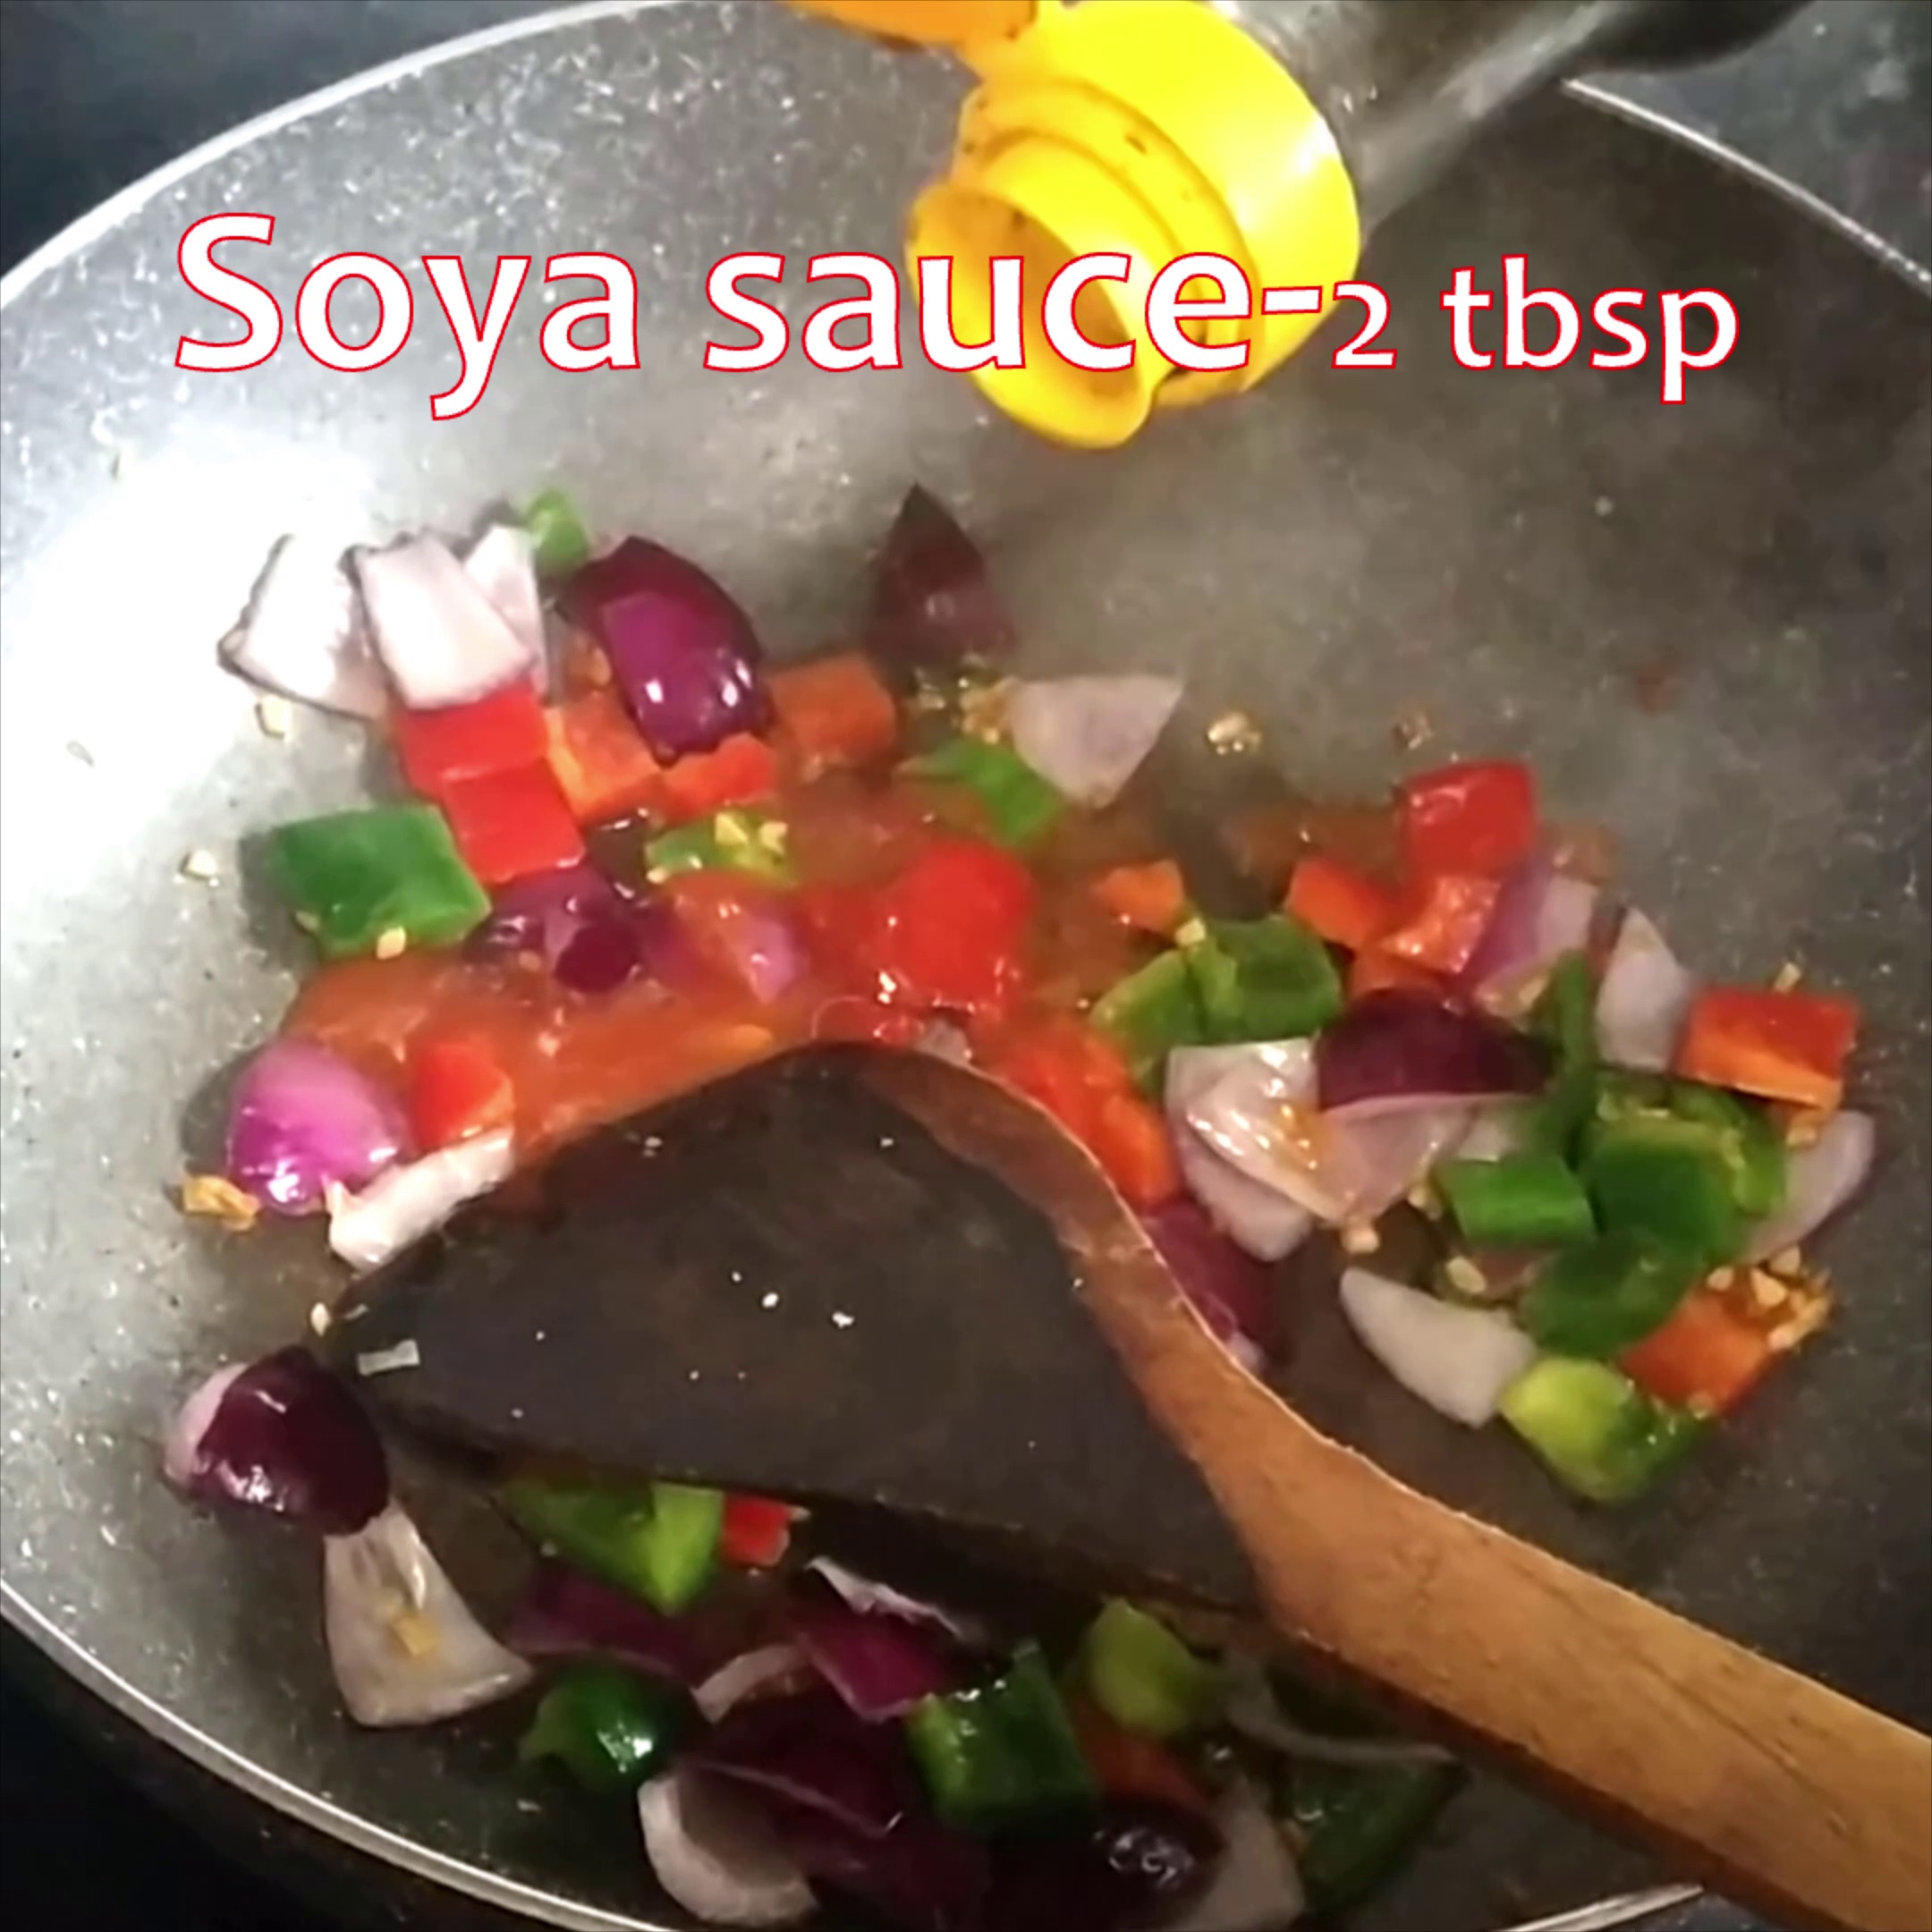 Step 5 - Now add sauces-tomato sauce, red/green chili sauce and soy sauce. Mix everything well and fry for a min.